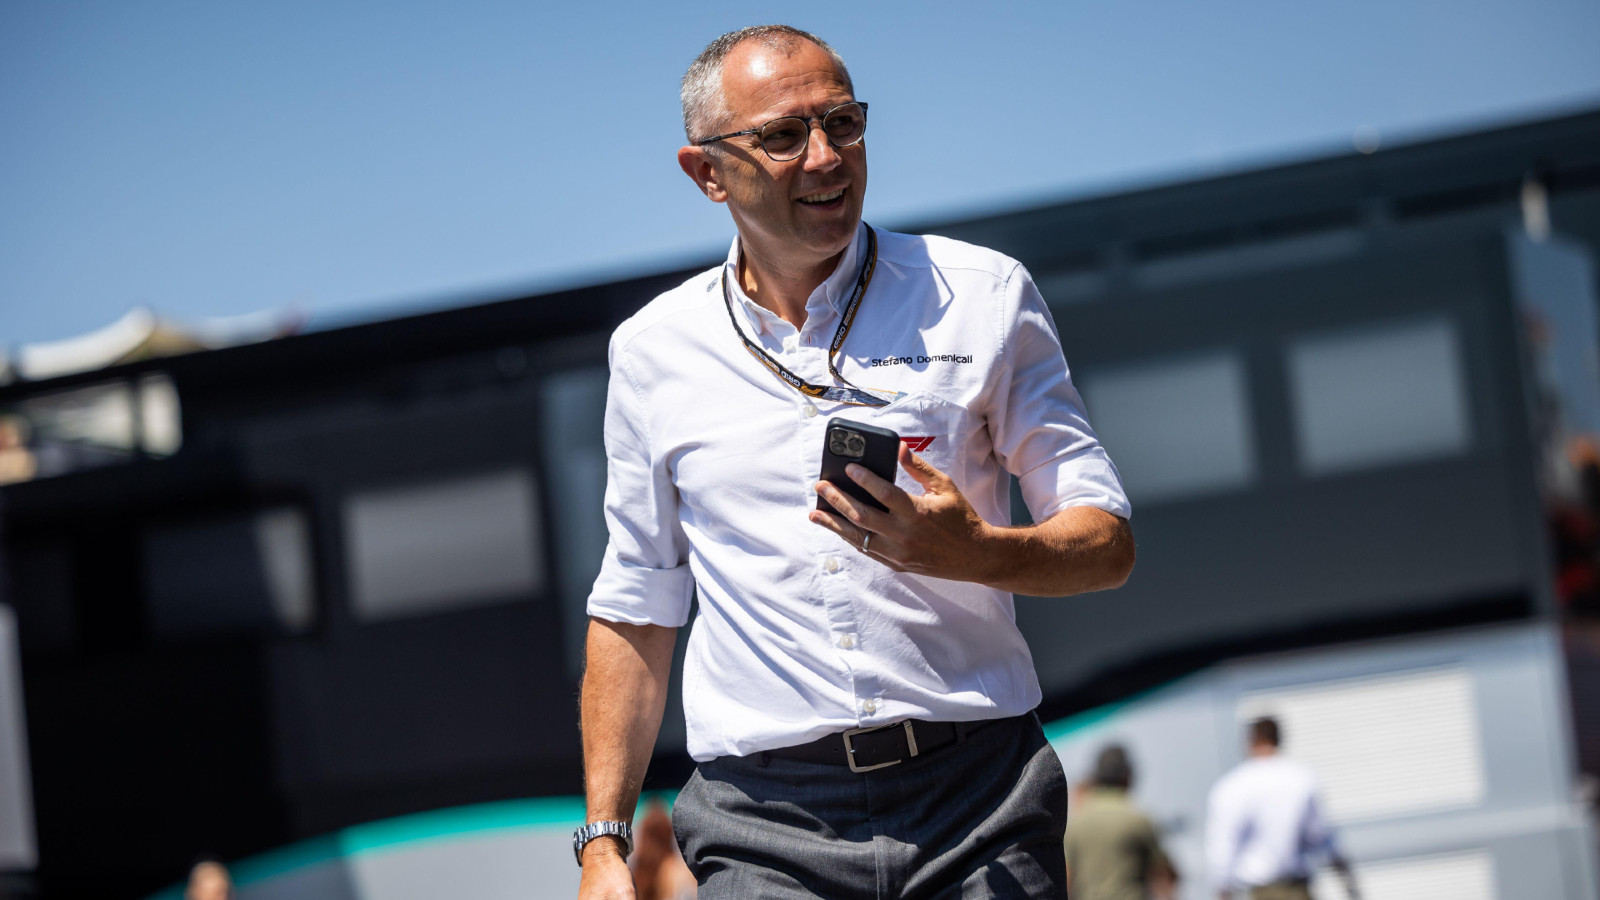 Formula 1 CEO Stefano Domenicali at the French Grand Prix. Paul Ricard, July 2022.